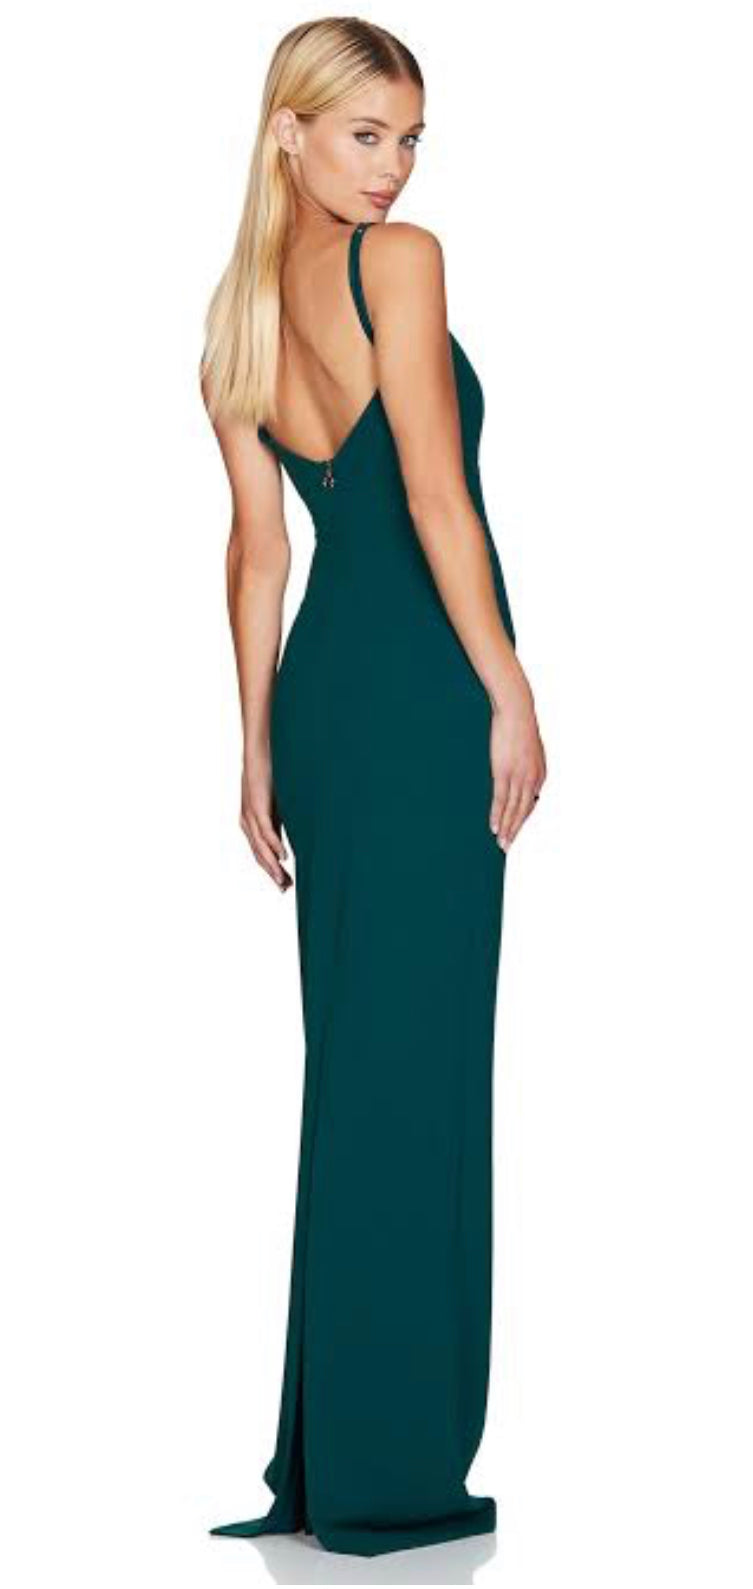 Nookie Bailey Gown Teal Green rear view on white background